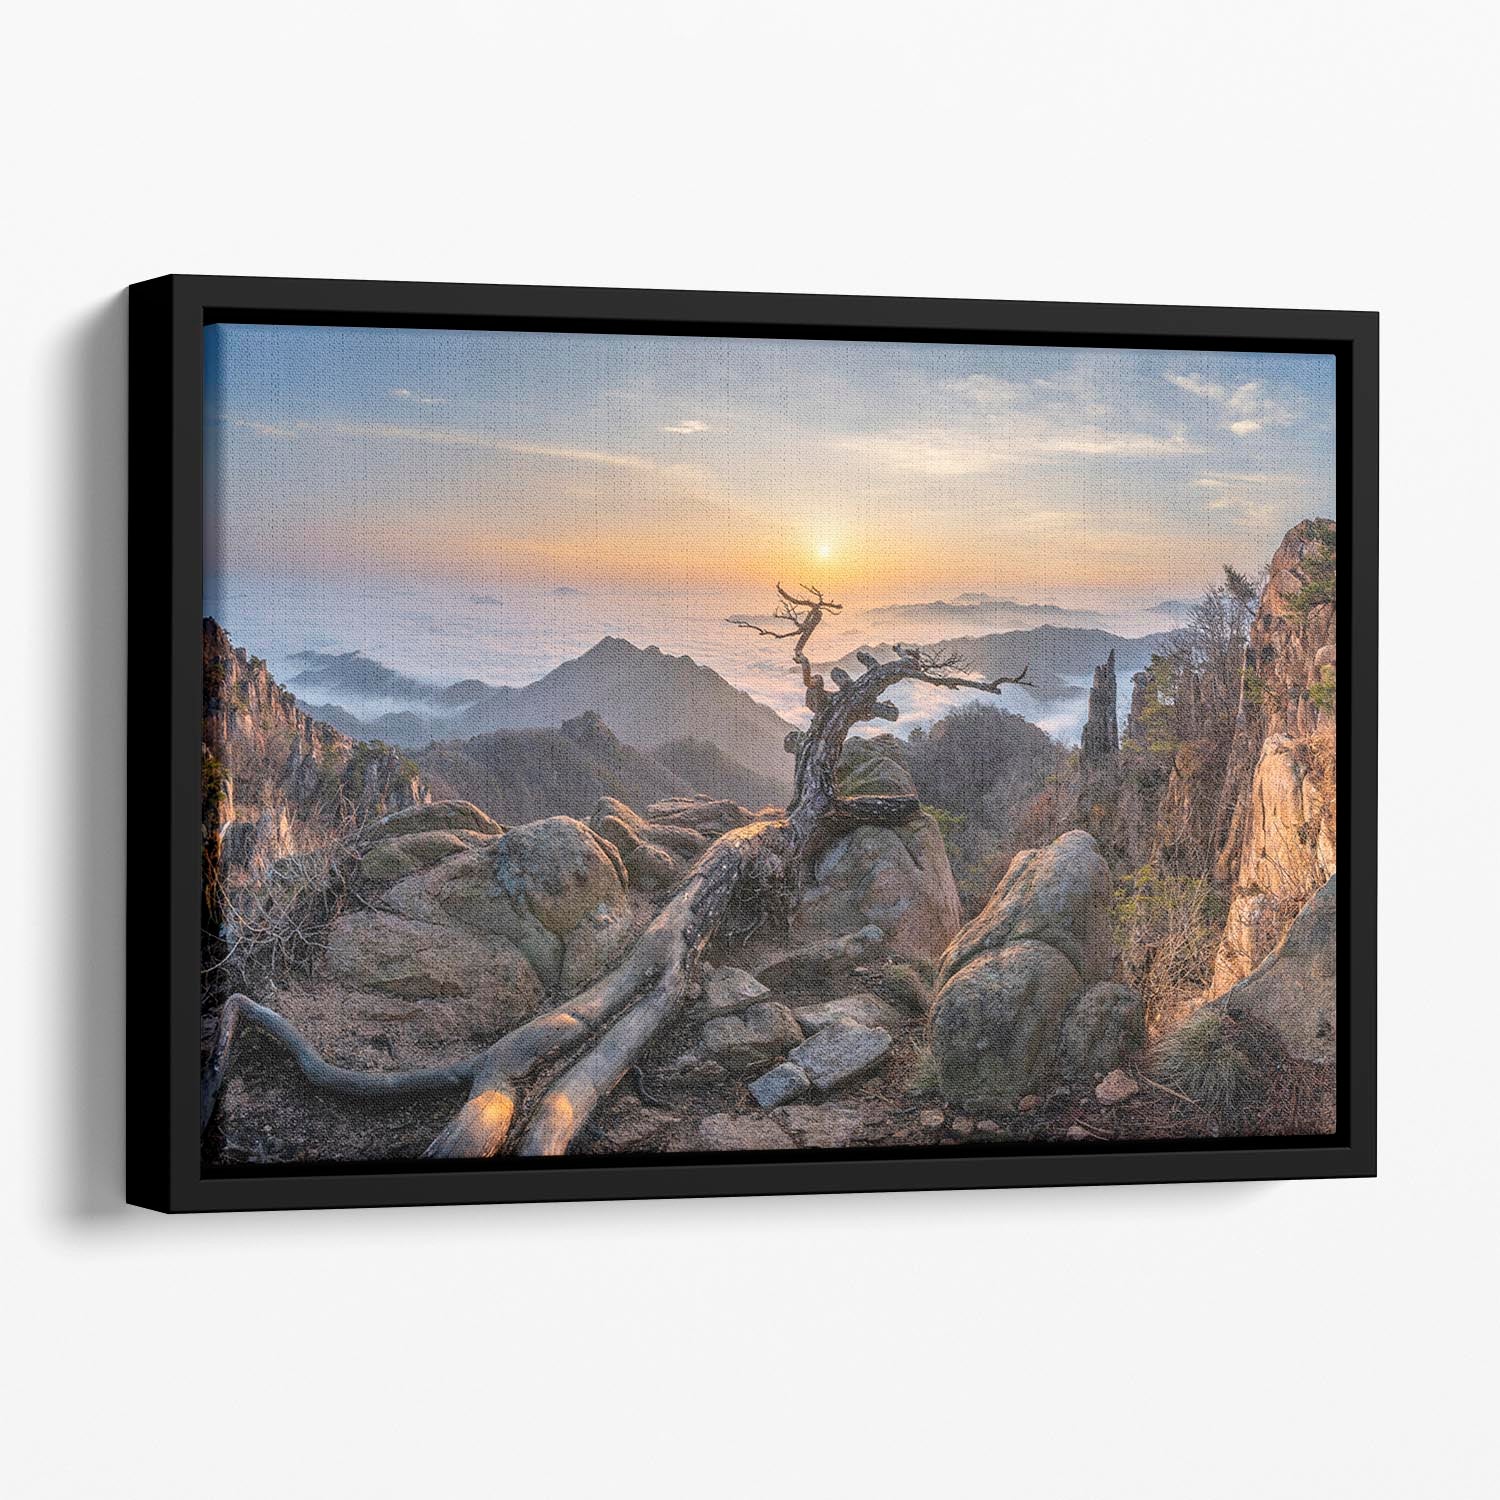 Dead pine On The Mountains Floating Framed Canvas - Canvas Art Rocks - 1